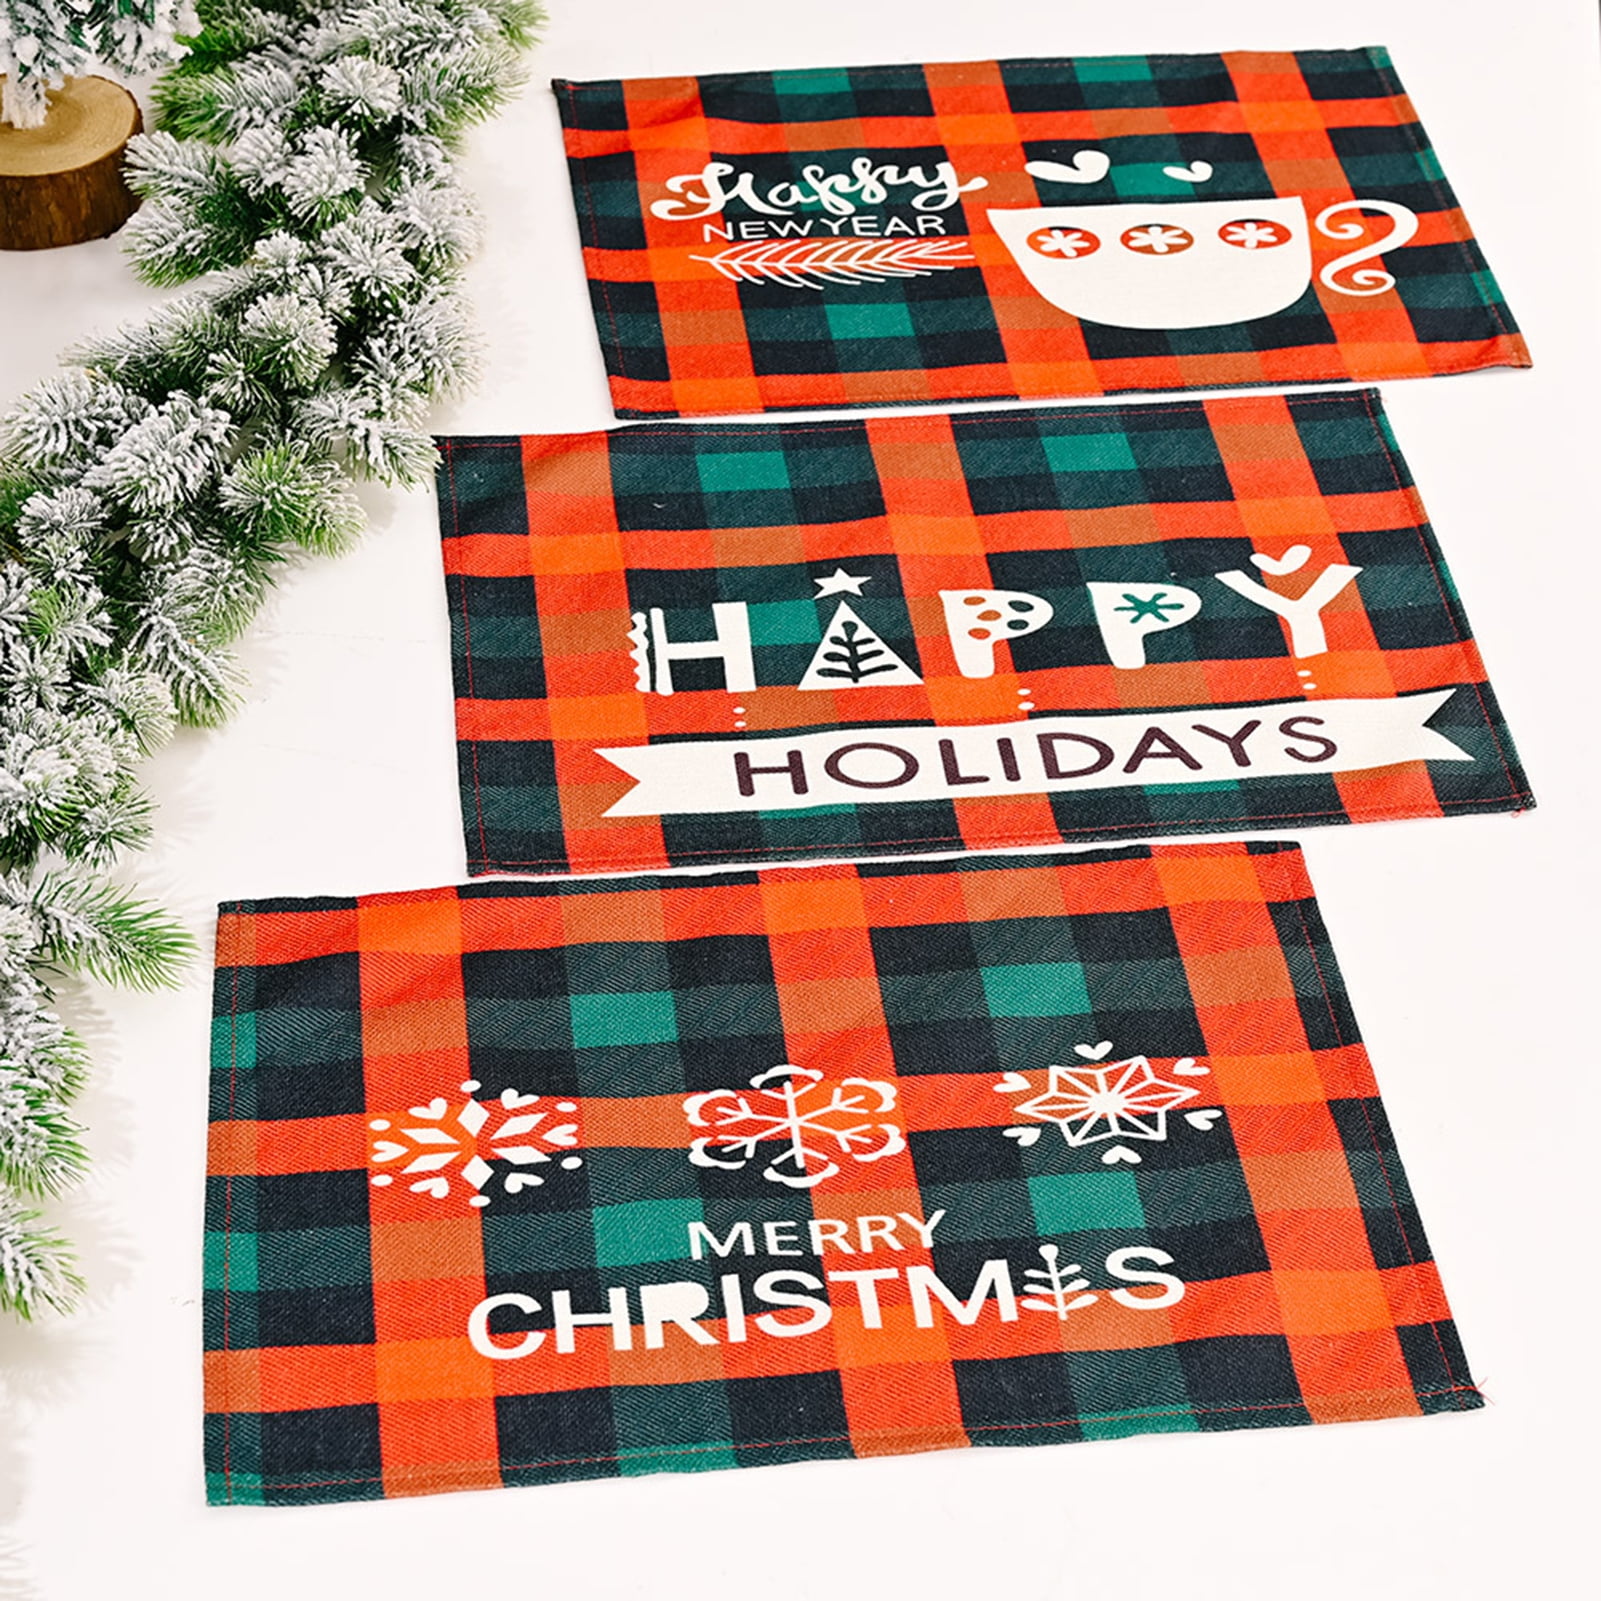 6PCS Christmas PVC Placemats Waterproof Dining Table Place Mats for Christmas Red Christmas Gnome Shape Table Mats Set for Dining Room Kitchen Home Table Decoration Xmas Parties Family Gathering Lovely Xmas Place Mats